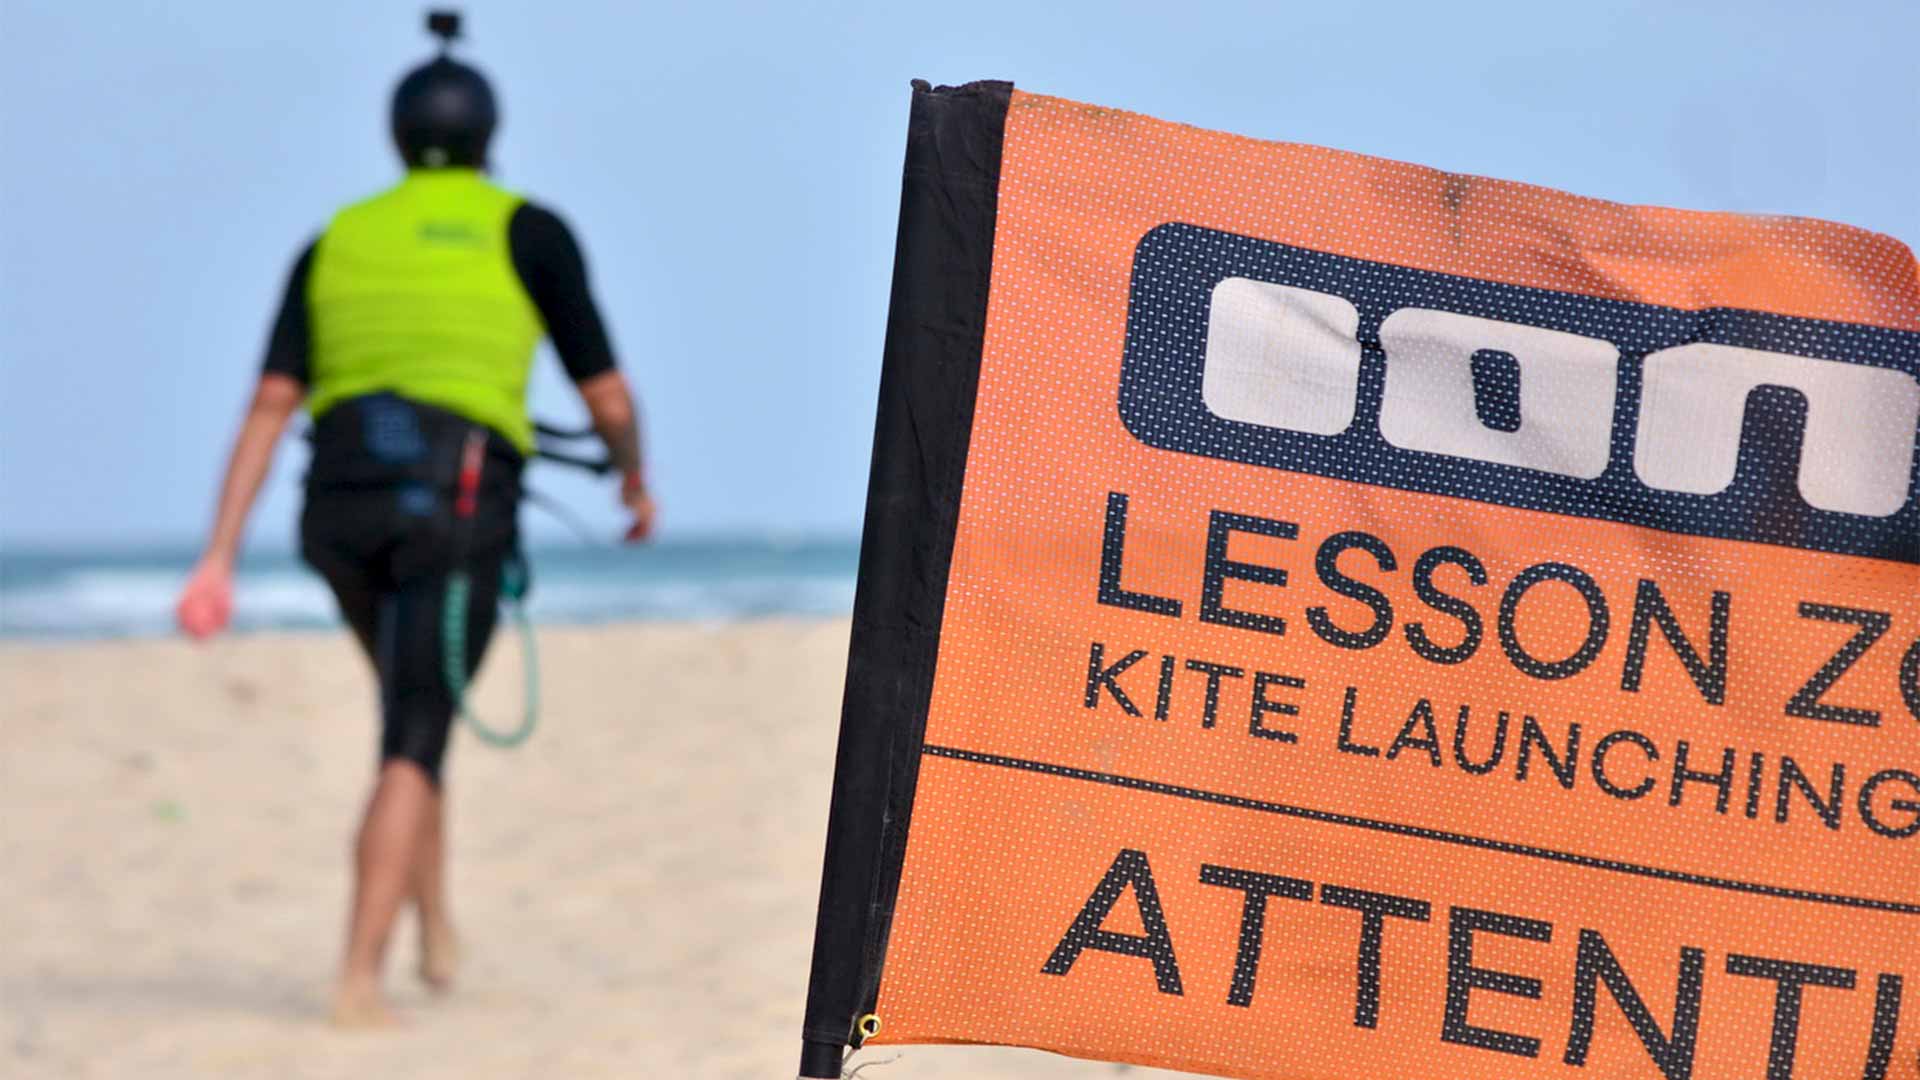 In front a flag indicating the kitesurfing course area and in the distance a student walking in safety gear.